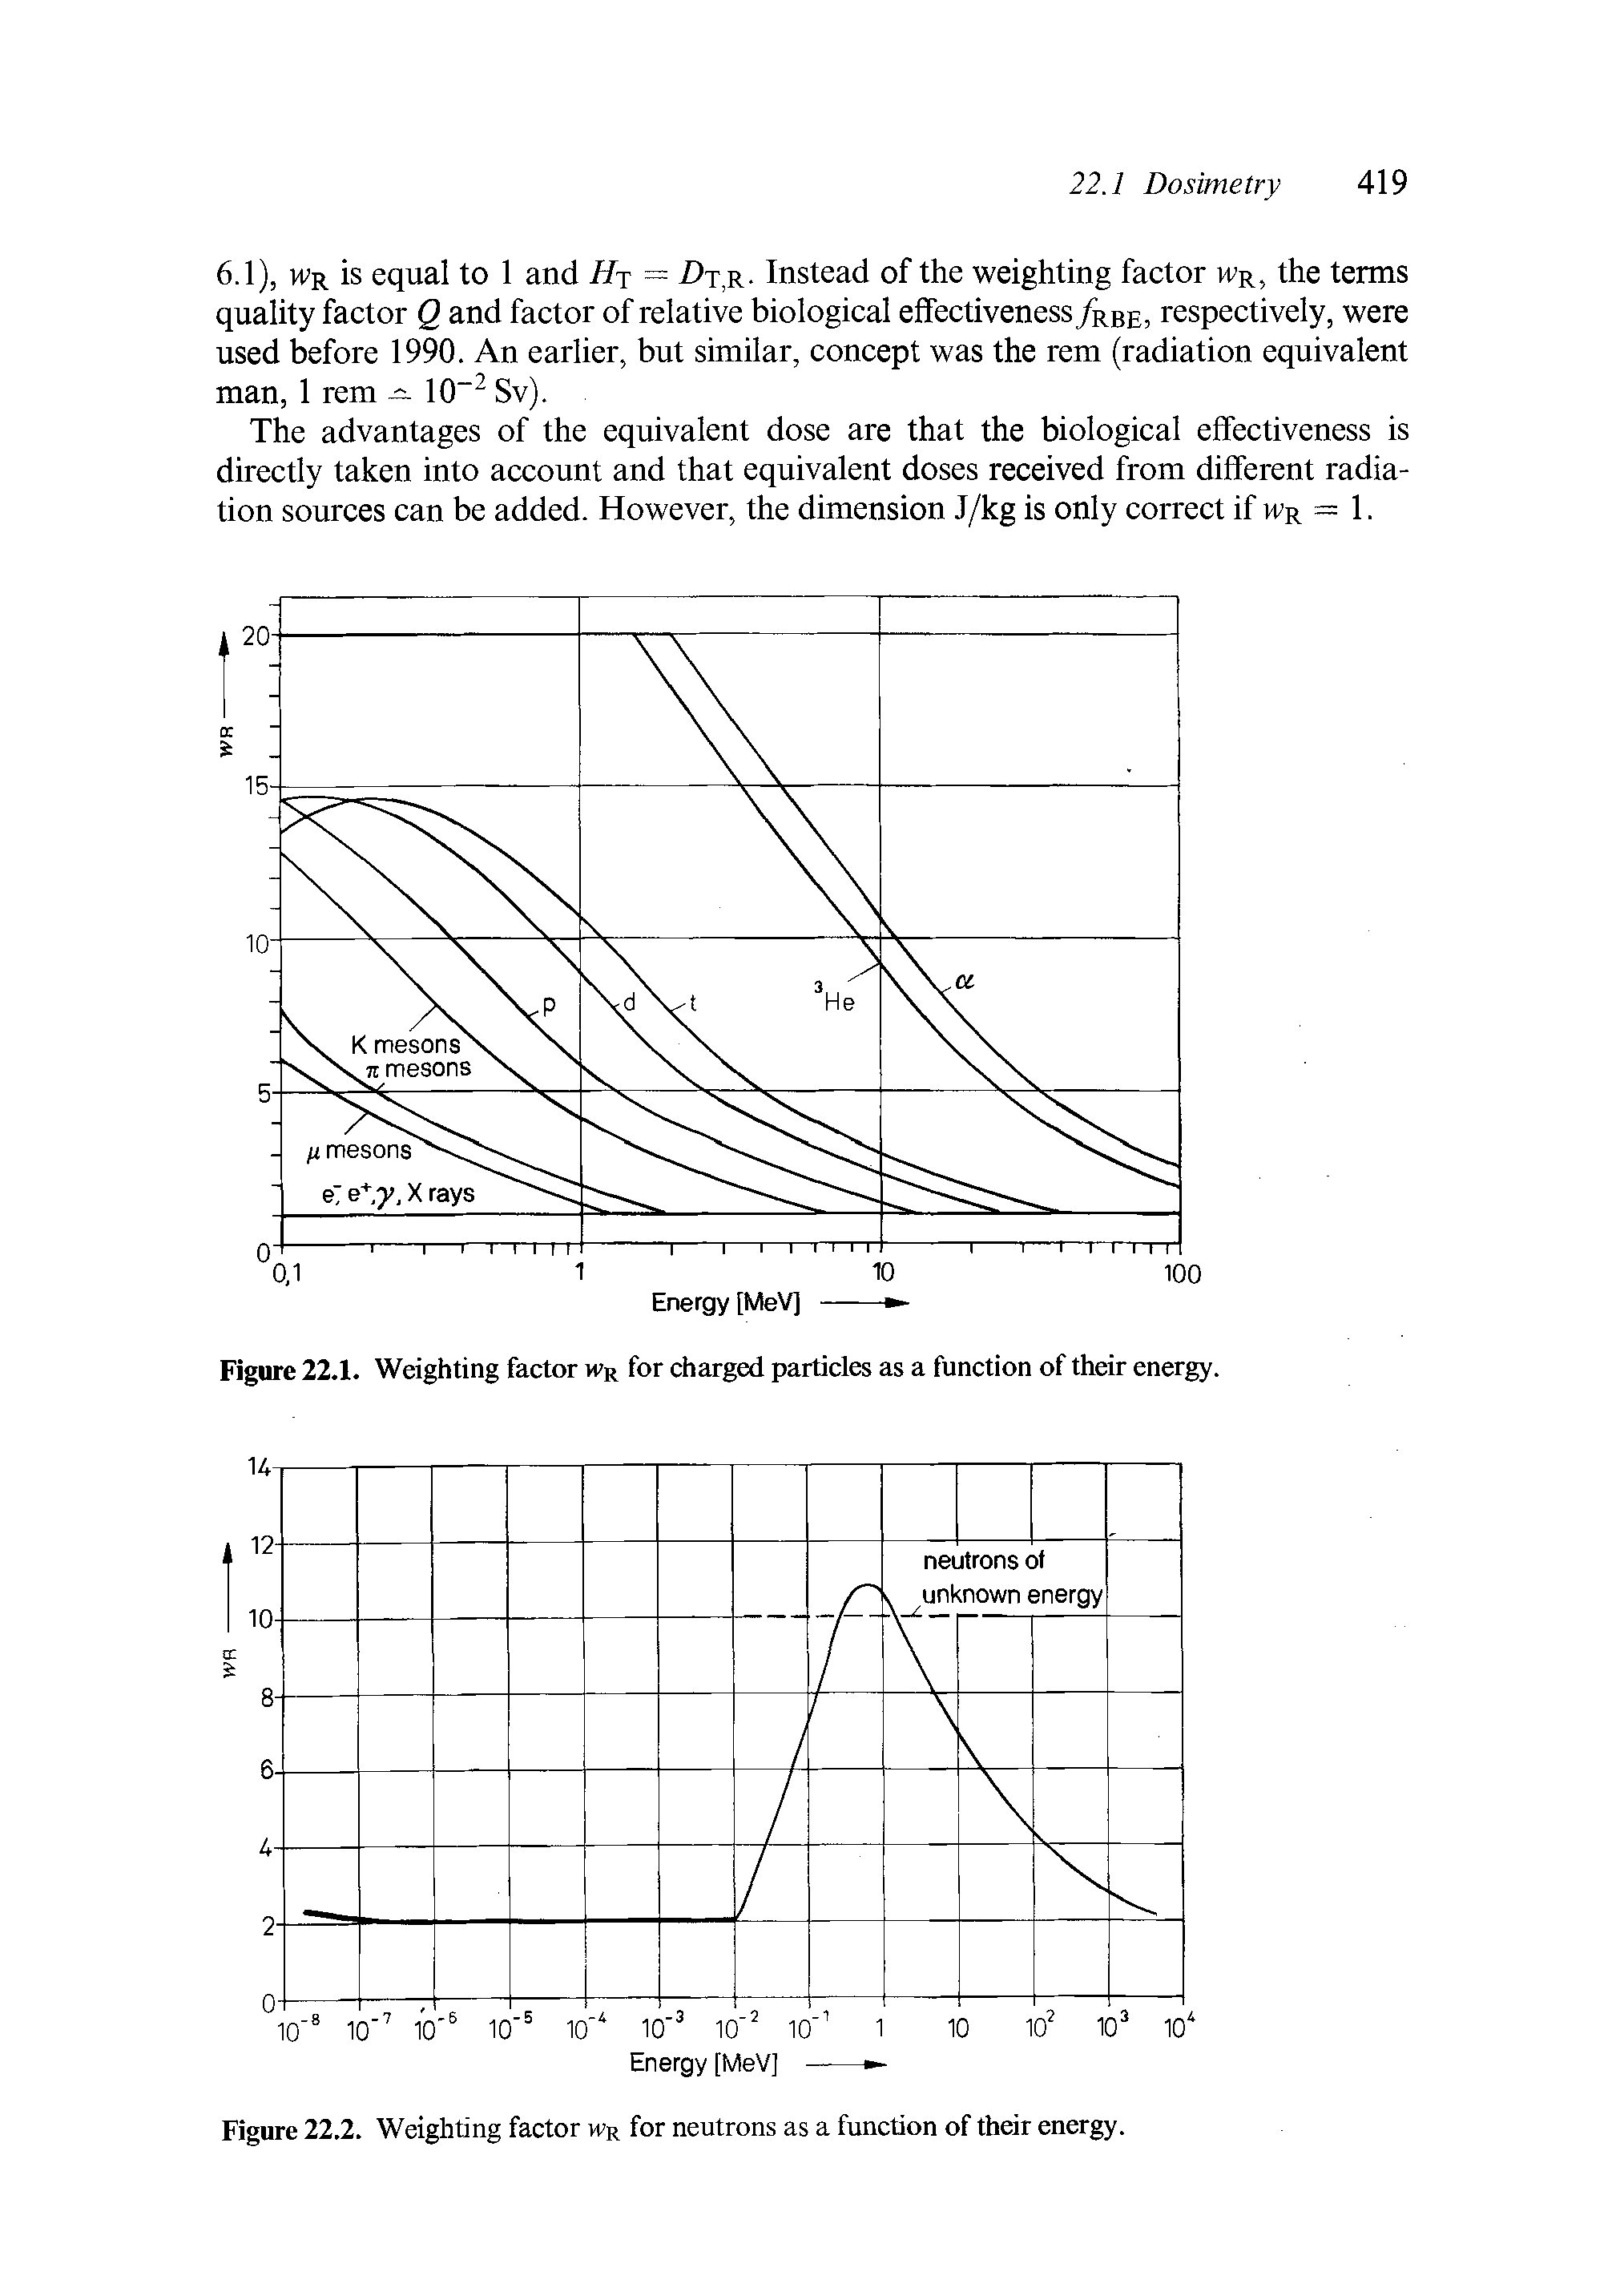 Figure 22.1. Weighting factor wr for charged particles as a function of their energy.